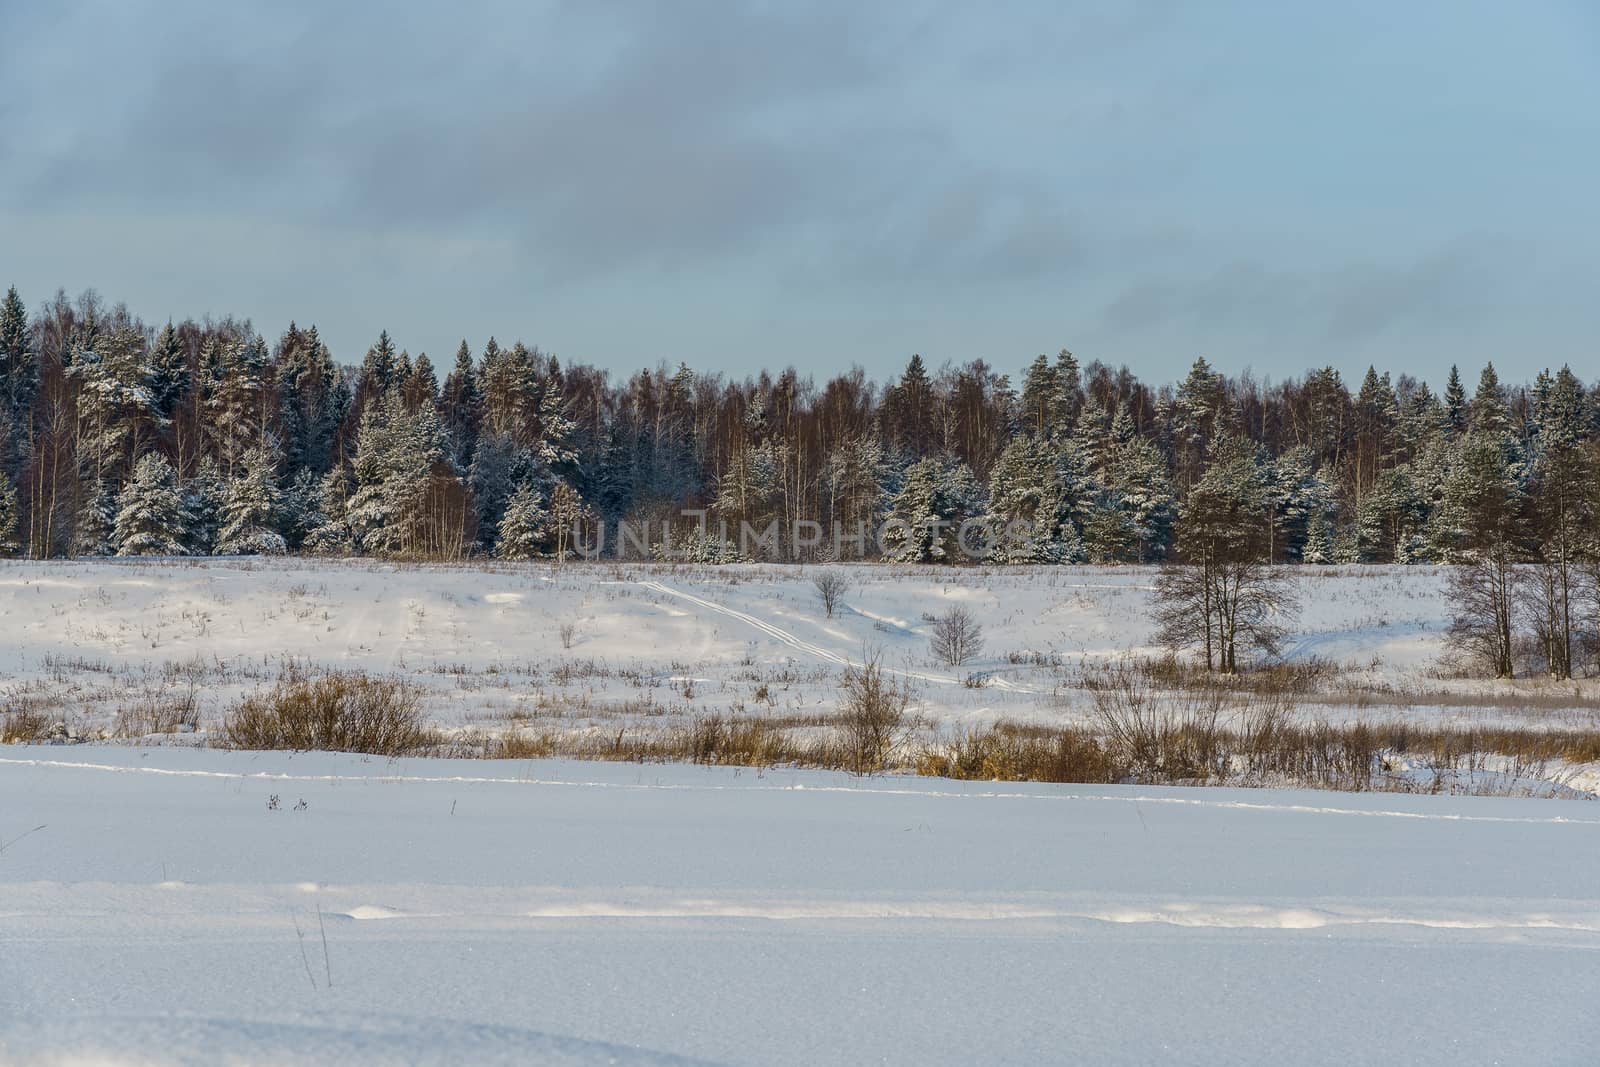 Winter landscape, snowy field and forest in the distance